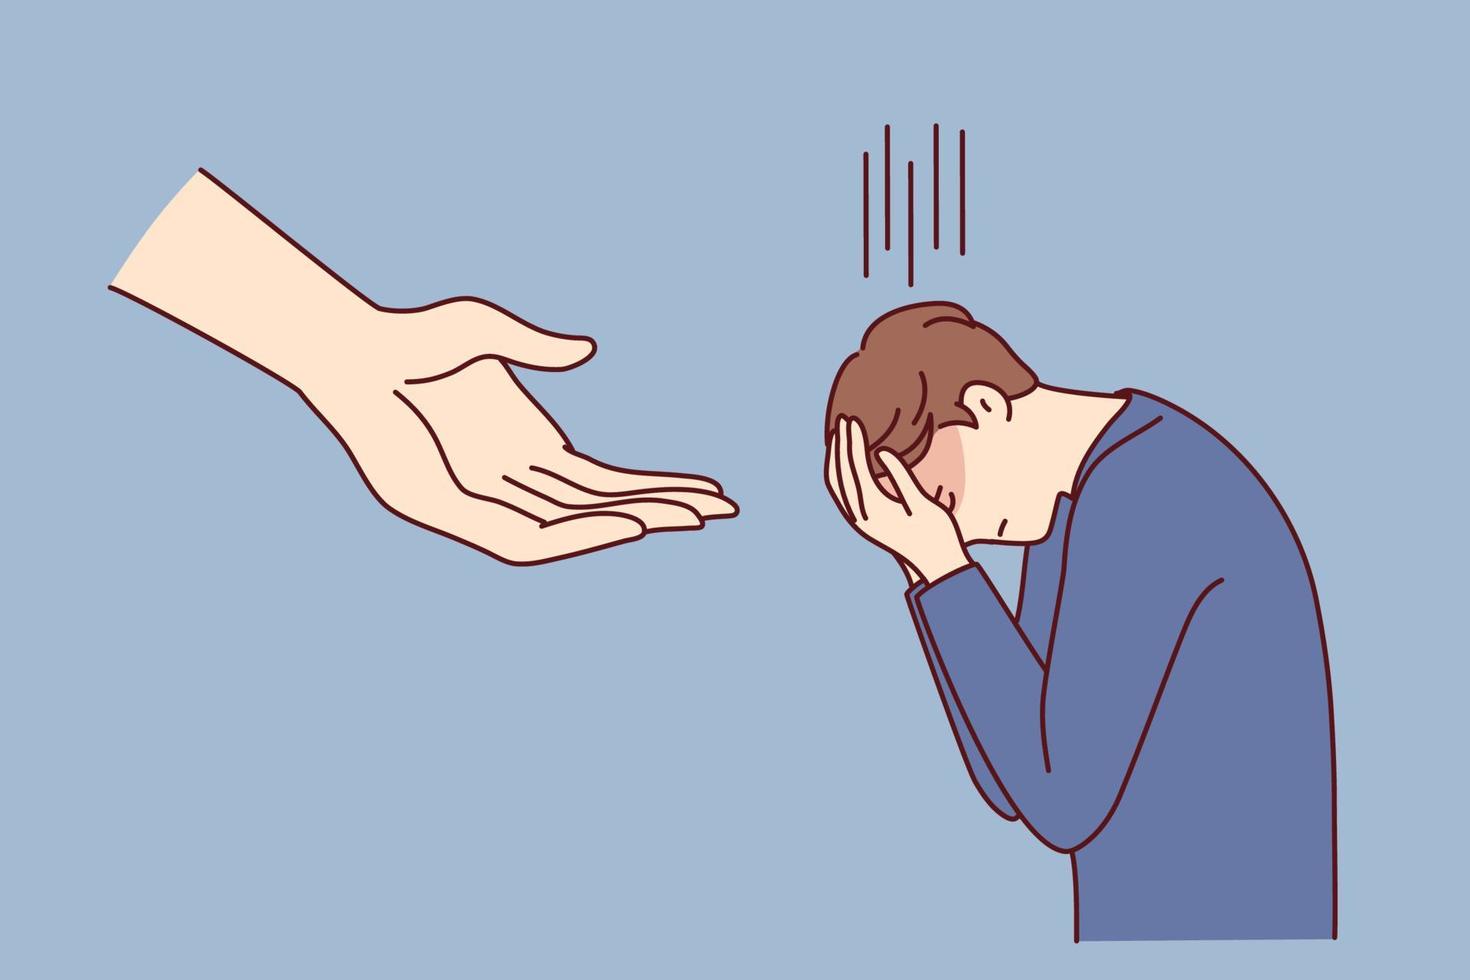 Crying man covers face with hands bowing head while standing near giant palm hanging from sky. Concept help from Lord for religious person who is in trouble and has lost hope. Flat vector image